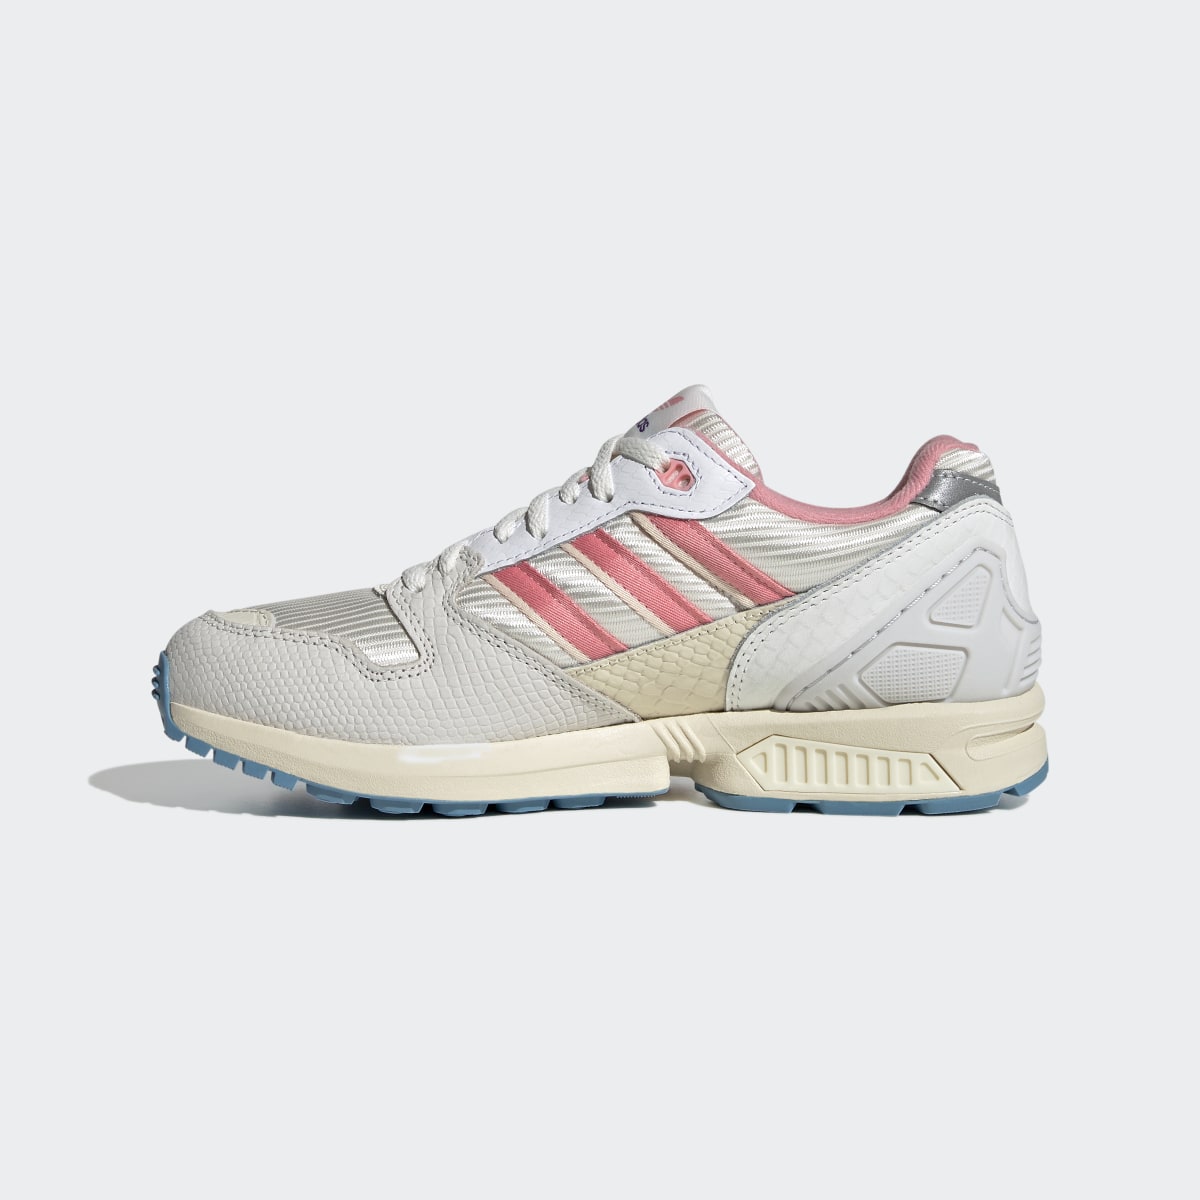 Adidas ZX 5020 Shoes. 7